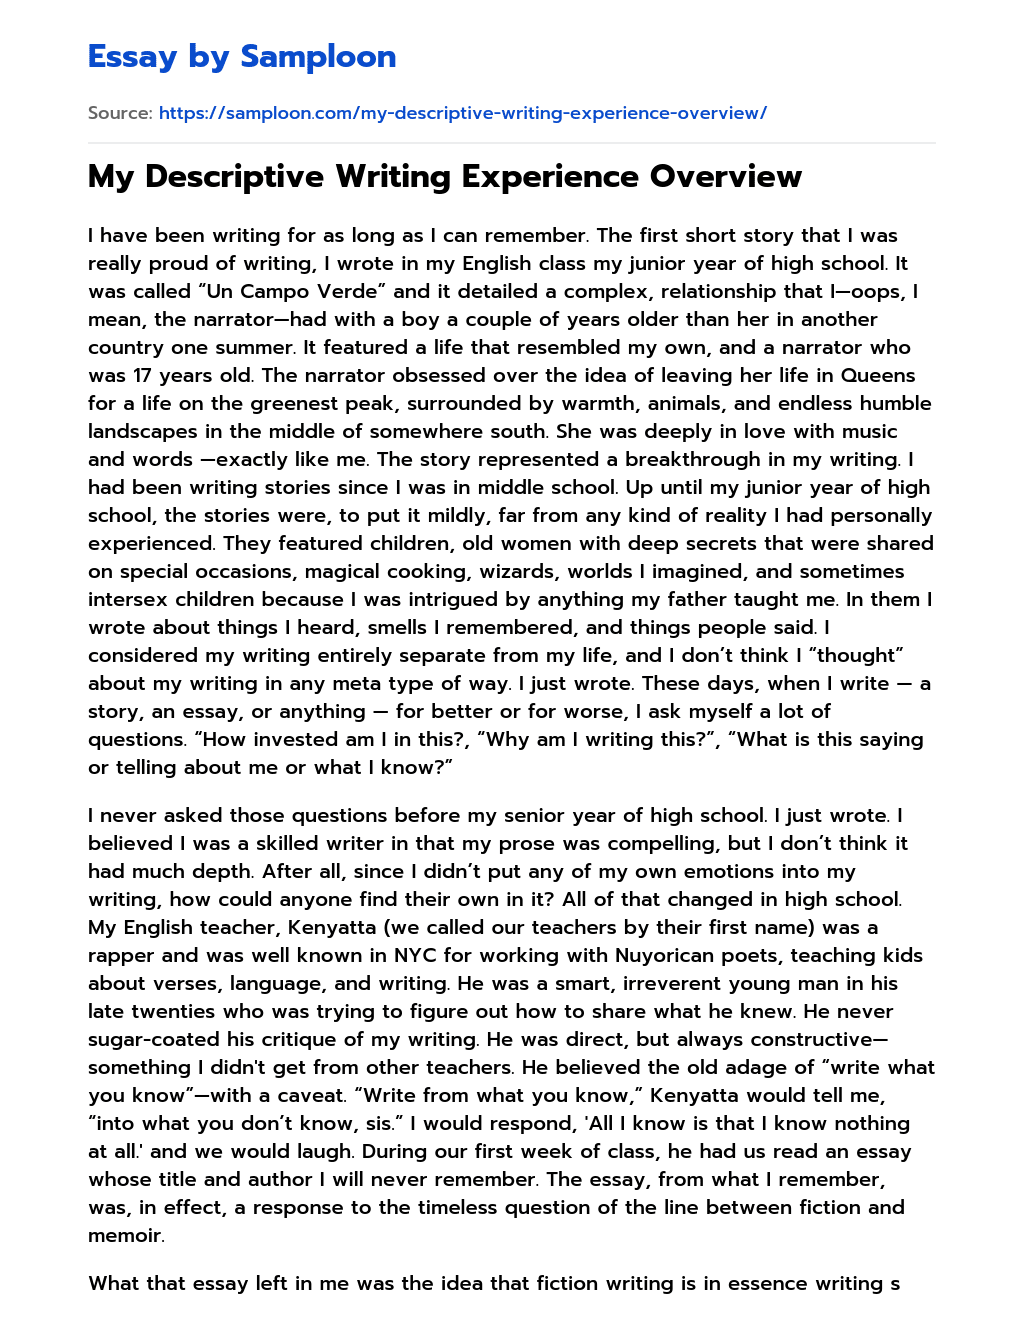 My Descriptive Writing Experience Overview essay